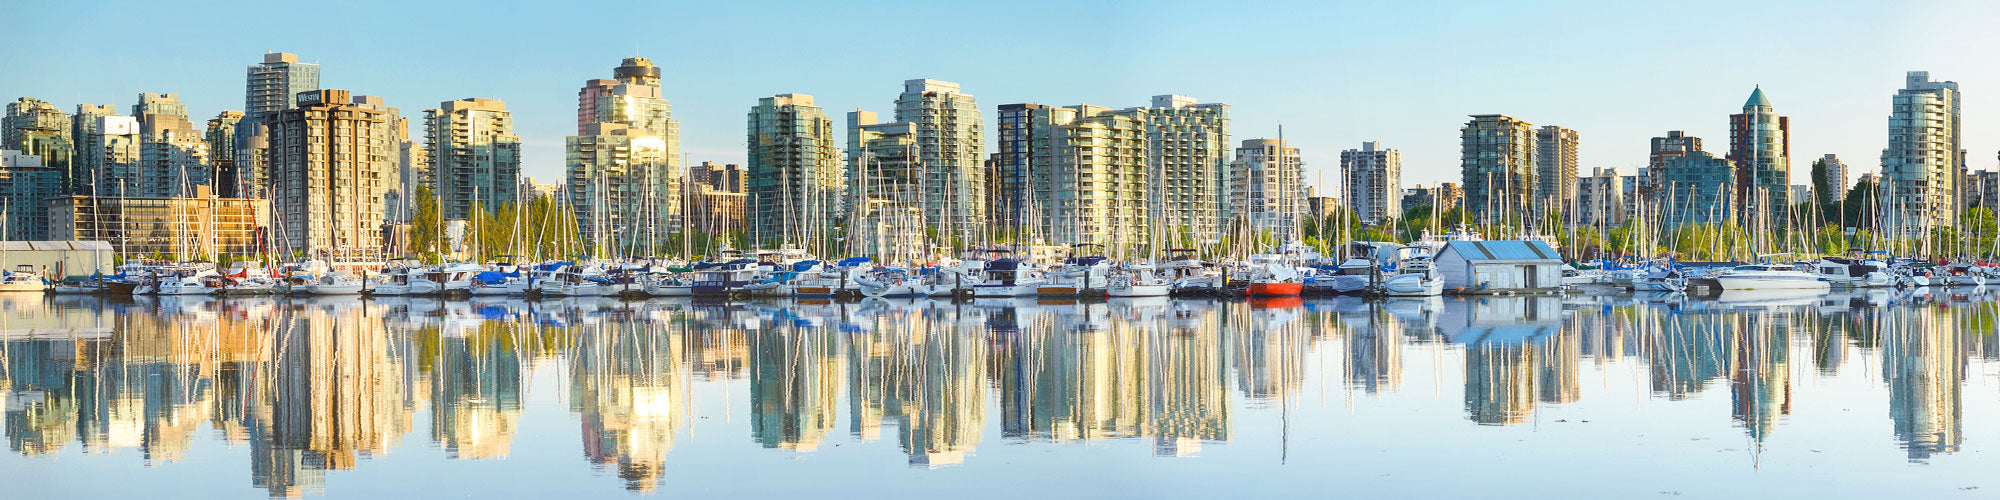 Fine Art Photography Prints of False Creek - Satellite Images of Earth - Point Two Design